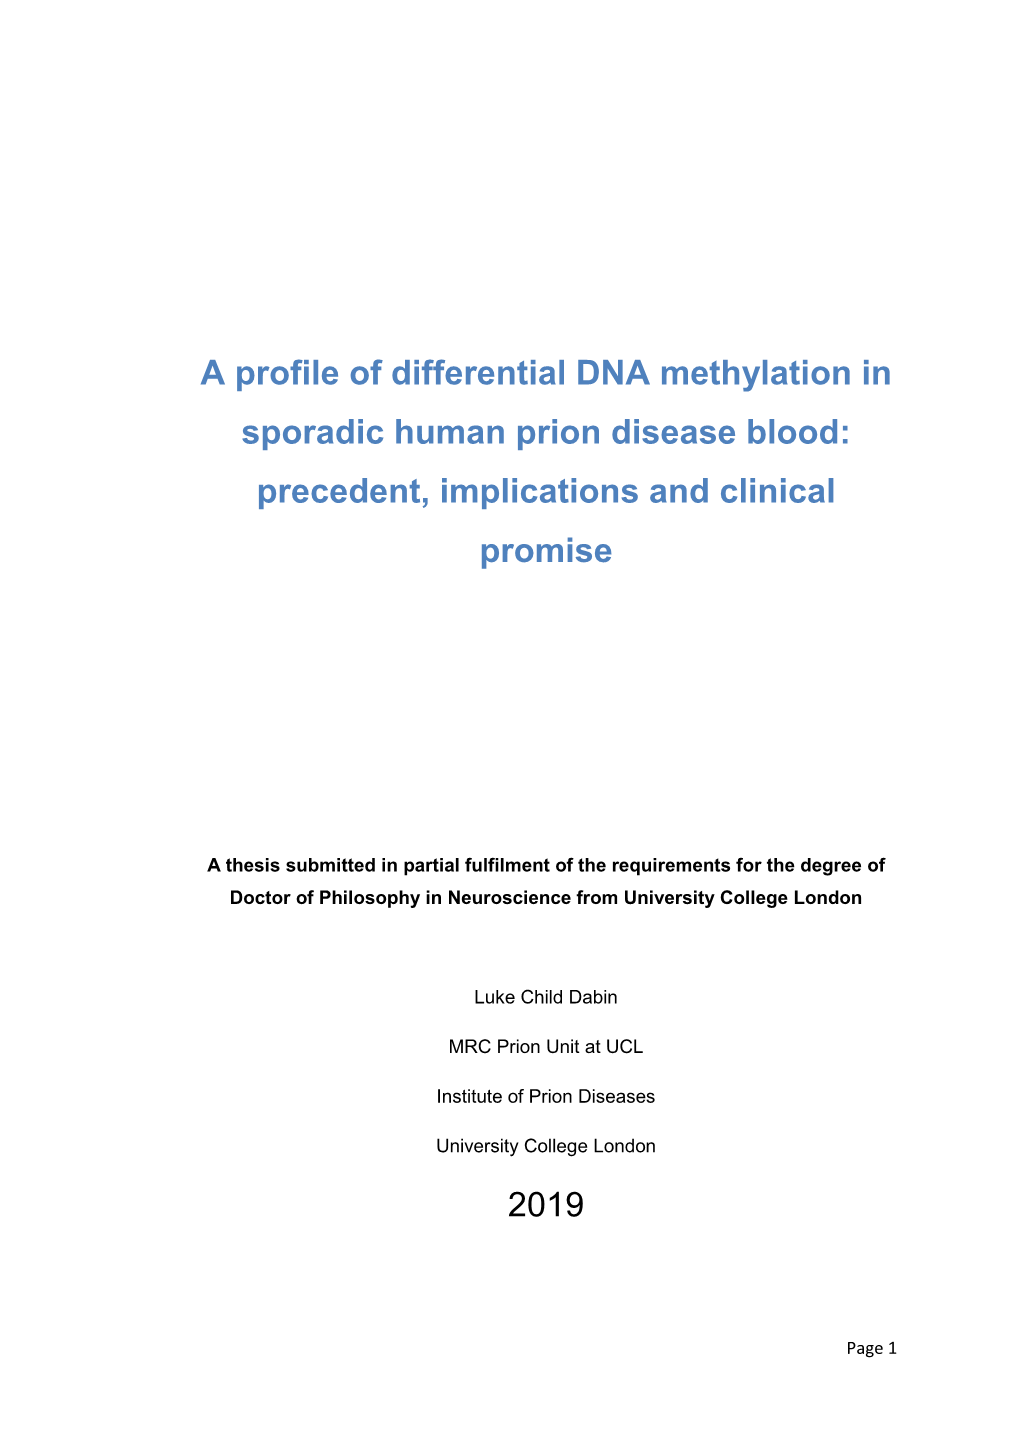 A Profile of Differential DNA Methylation in Sporadic Human Prion Disease Blood: Precedent, Implications and Clinical Promise